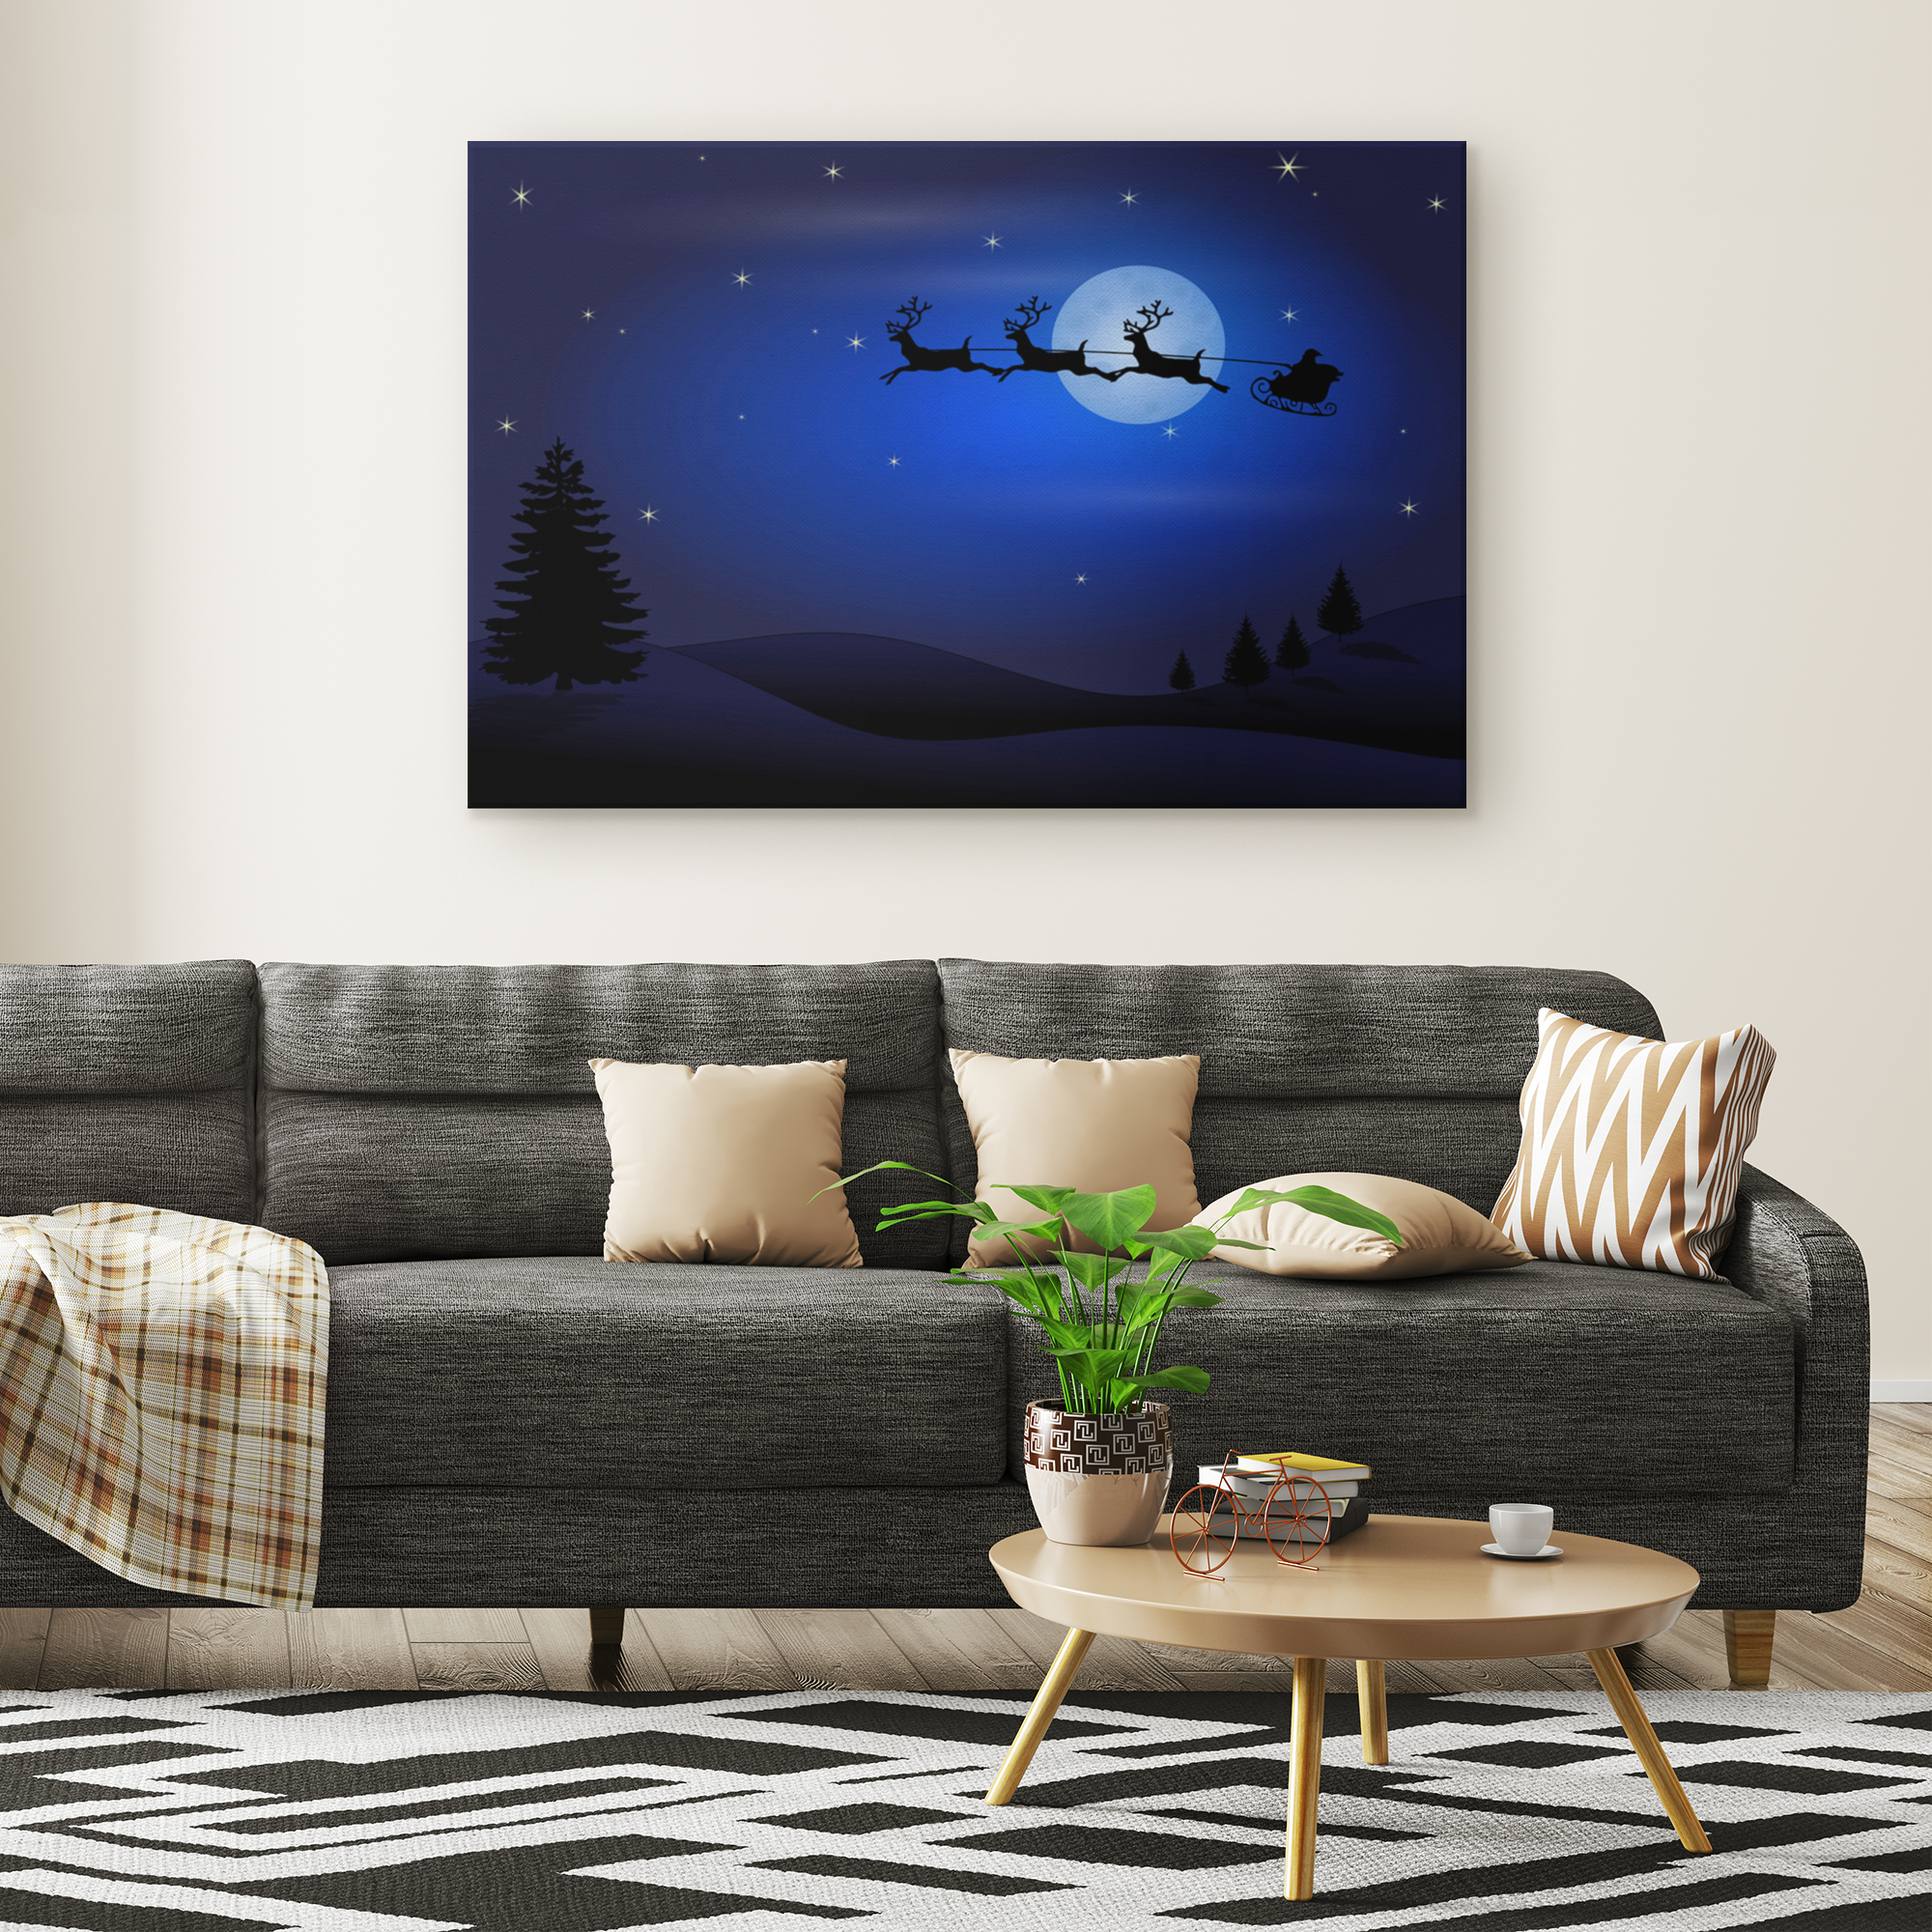 Santa and reindeers at work - Rectangle Gallery Canvas wall art